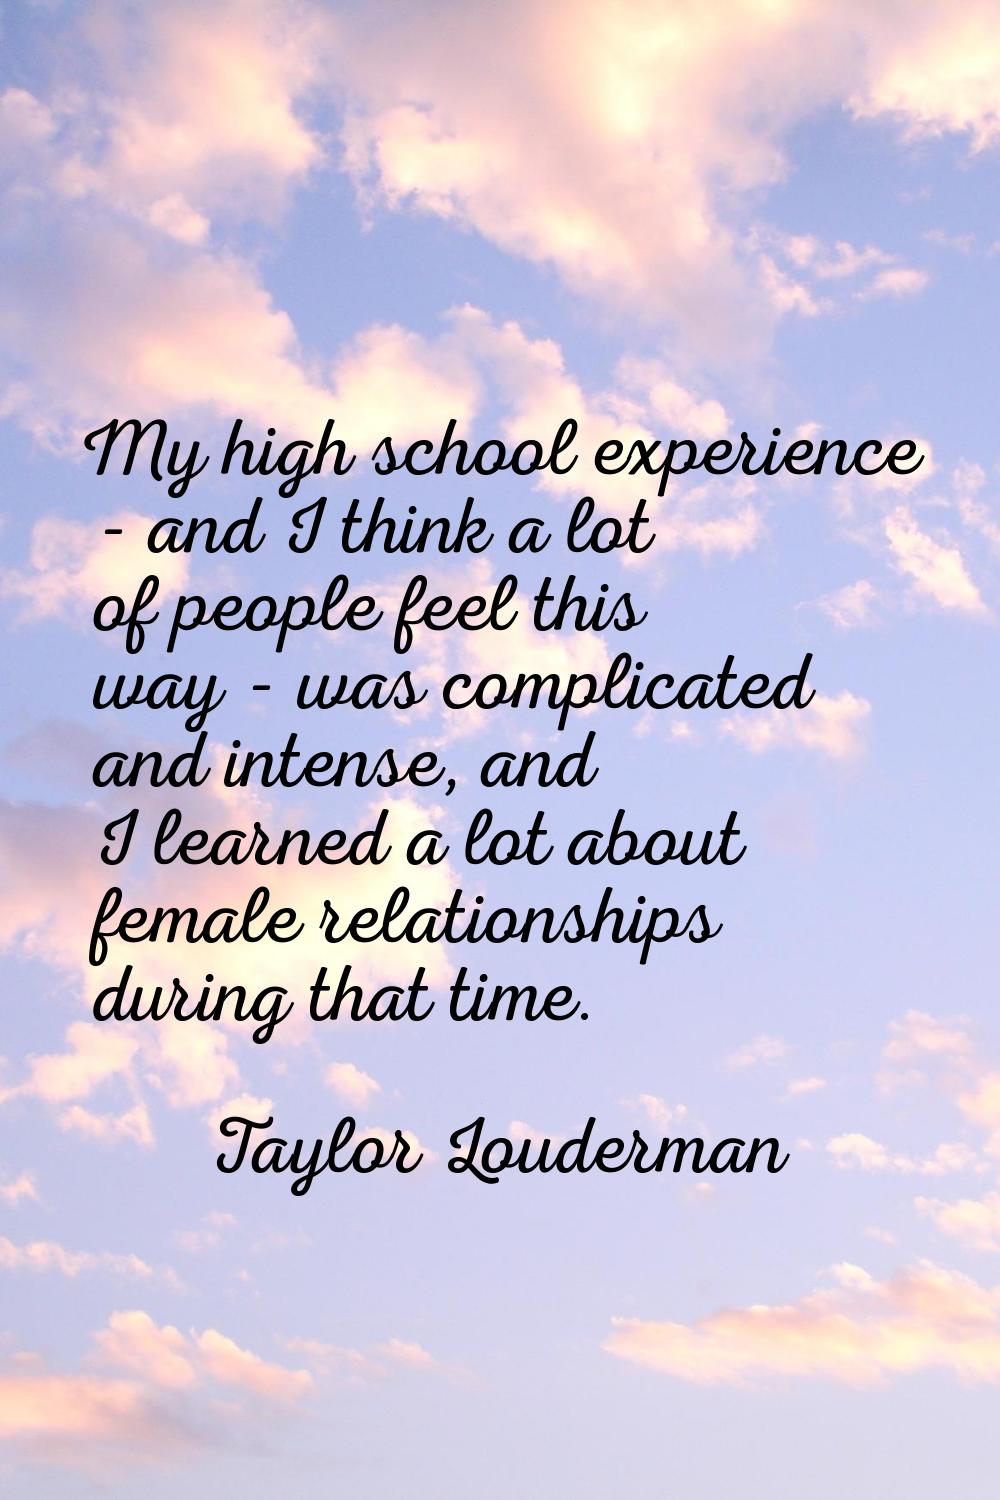 My high school experience - and I think a lot of people feel this way - was complicated and intense